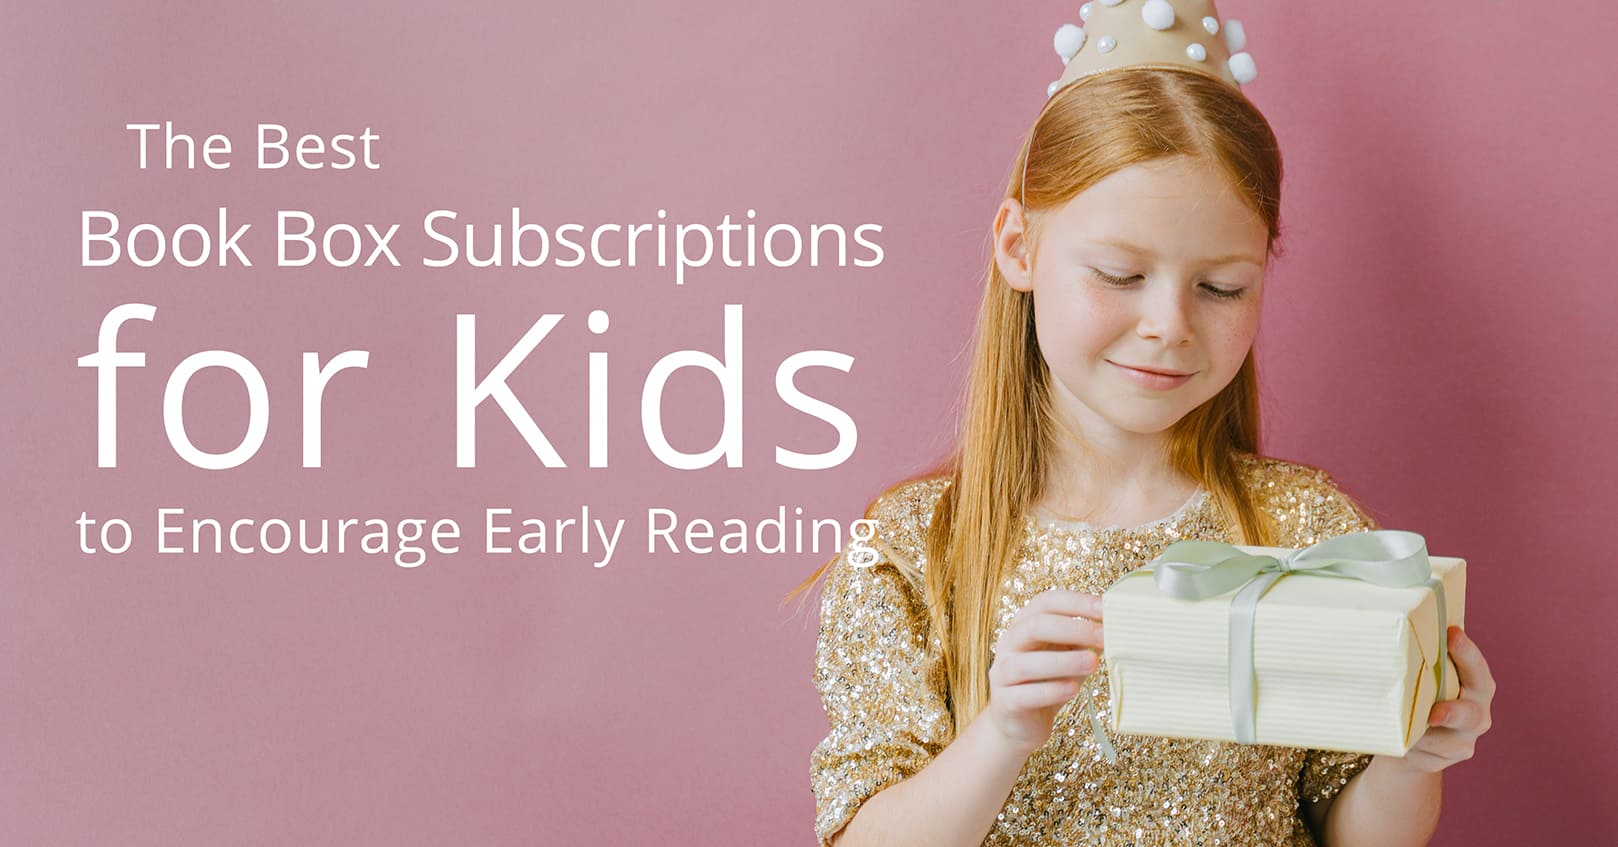 Best Book Box Subscriptions for Kids